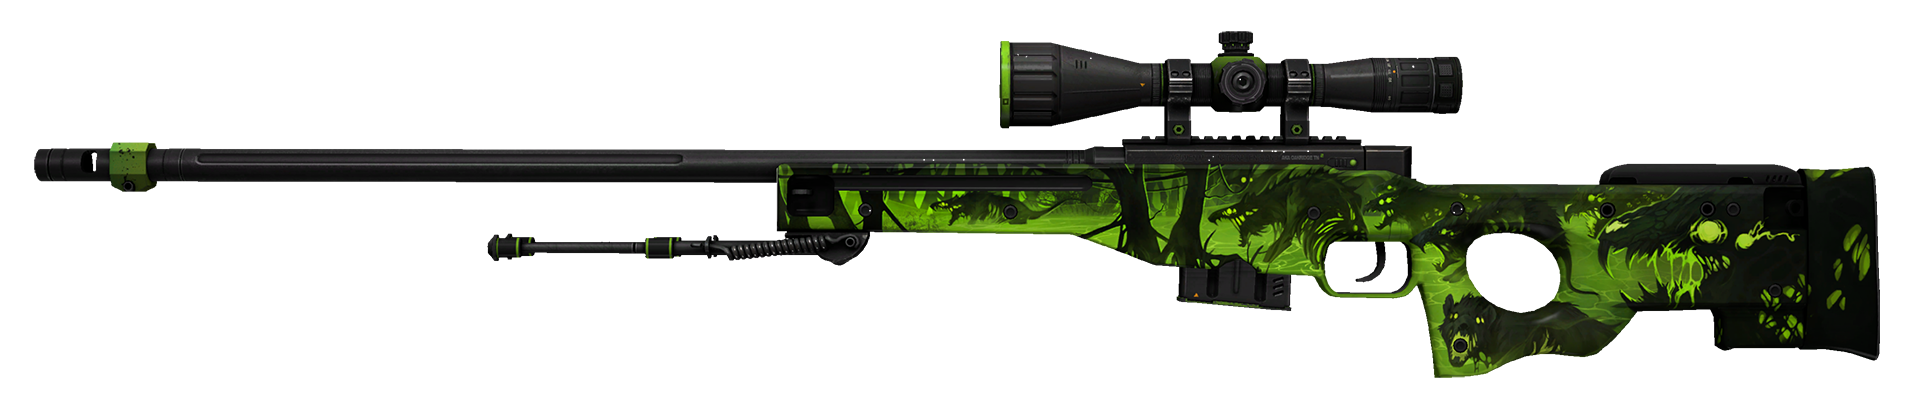 AWP Containment Breach Large Rendering